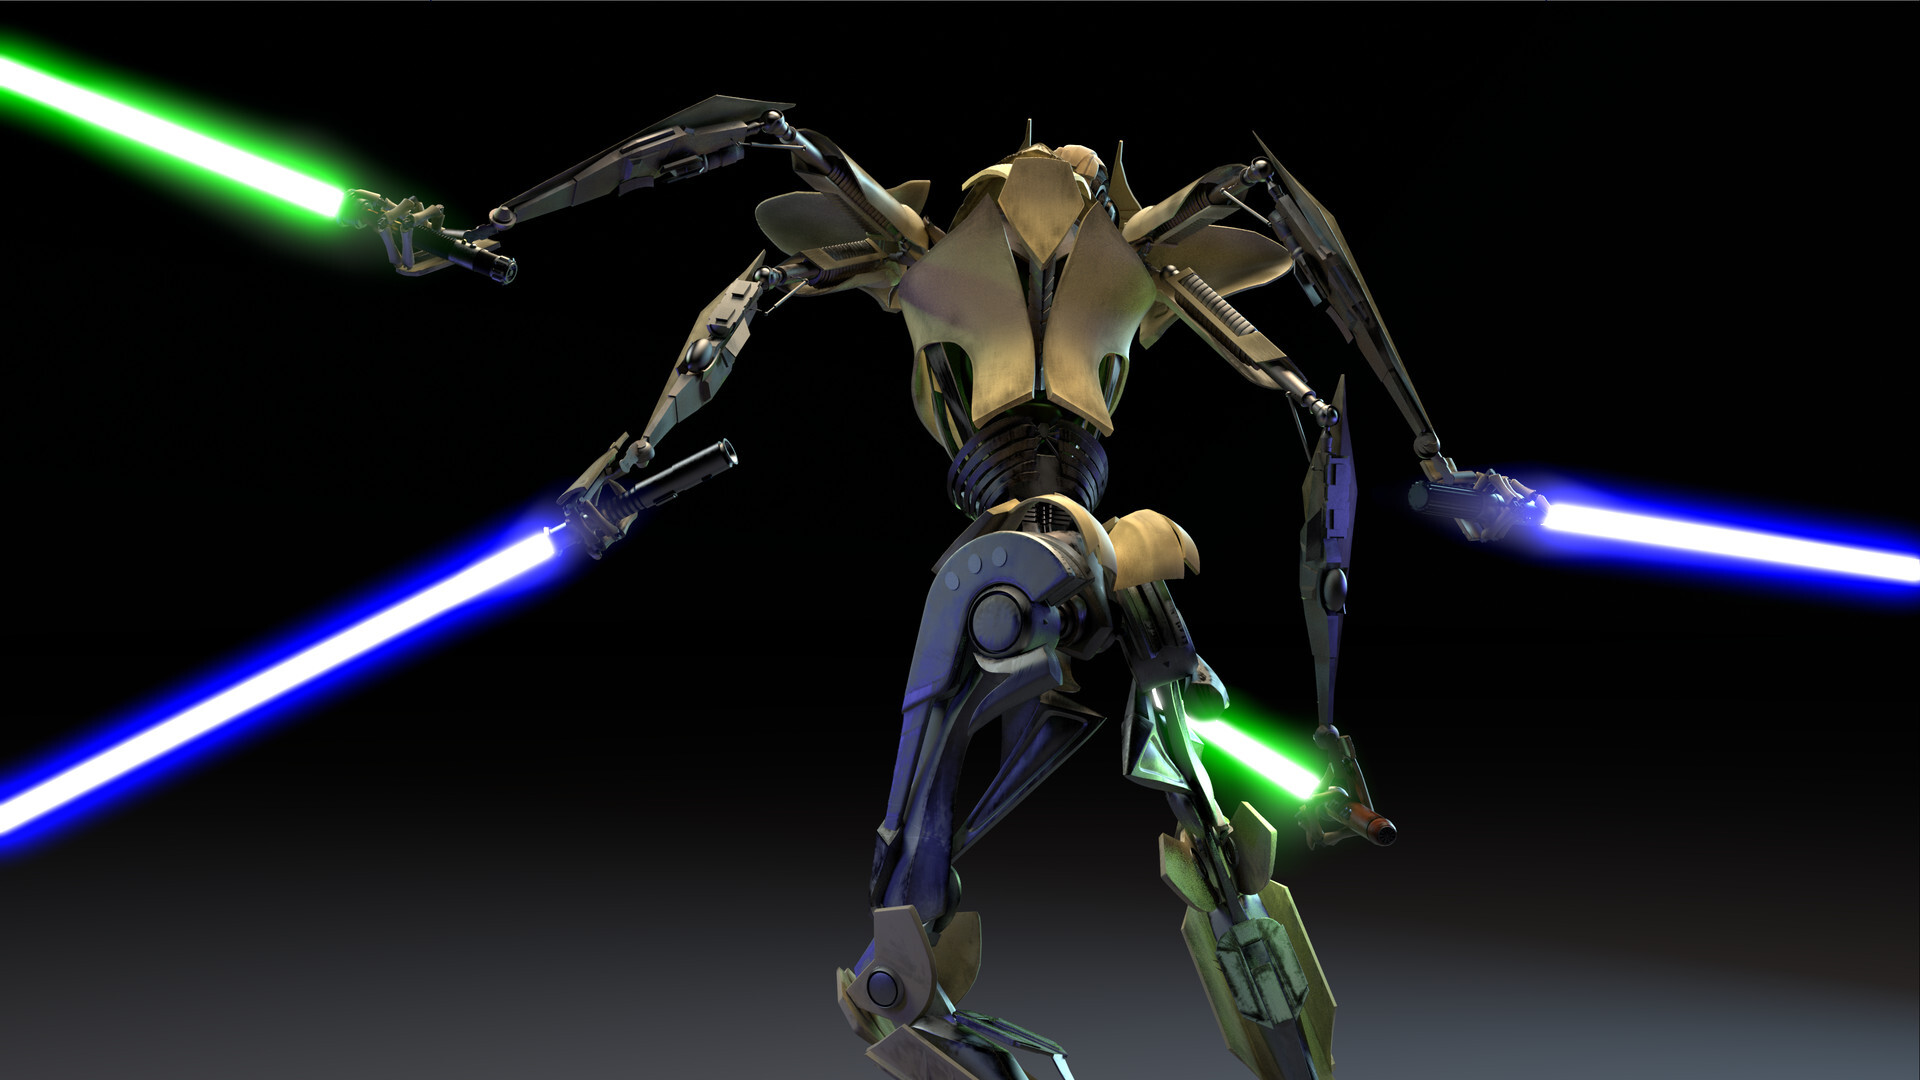 General Grievous: One of the most dangerous lightsaber duelists in the galaxy, Trained by Count Dooku, Four separate arms. 1920x1080 Full HD Wallpaper.